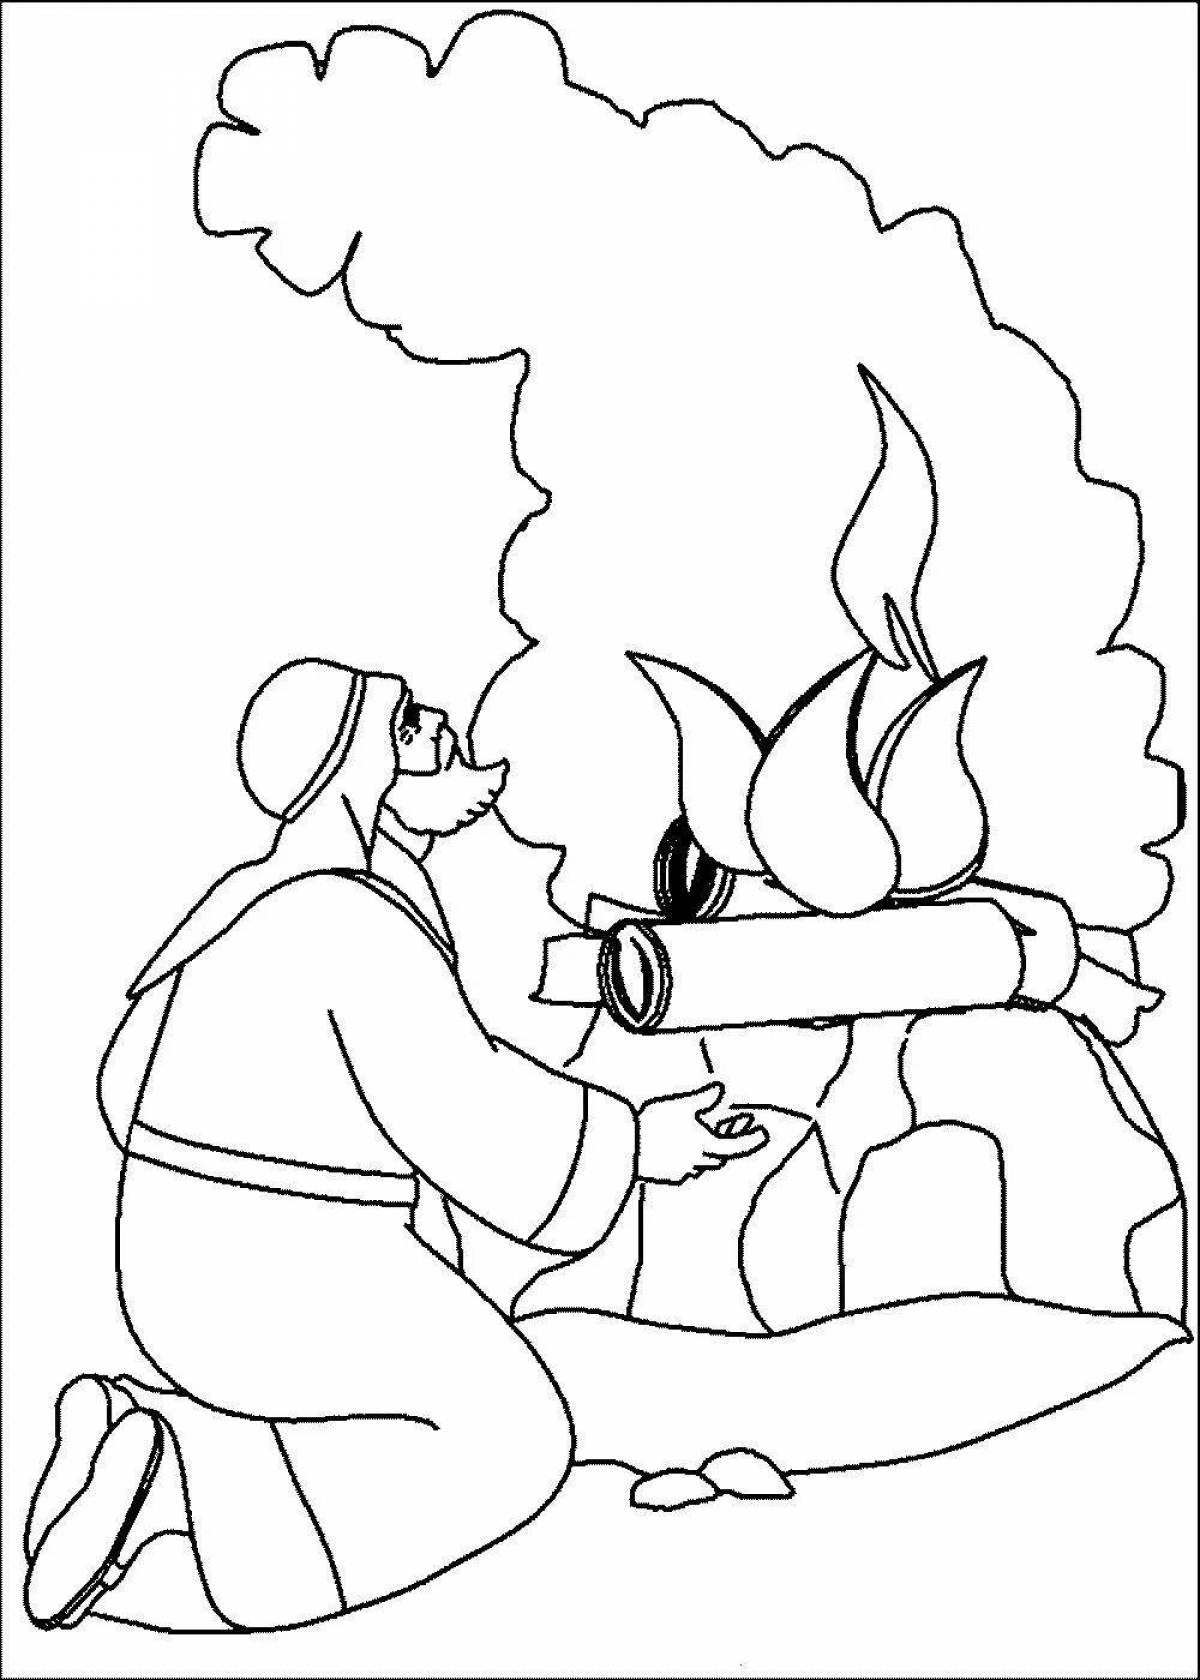 Enemy boiling fire coloring page